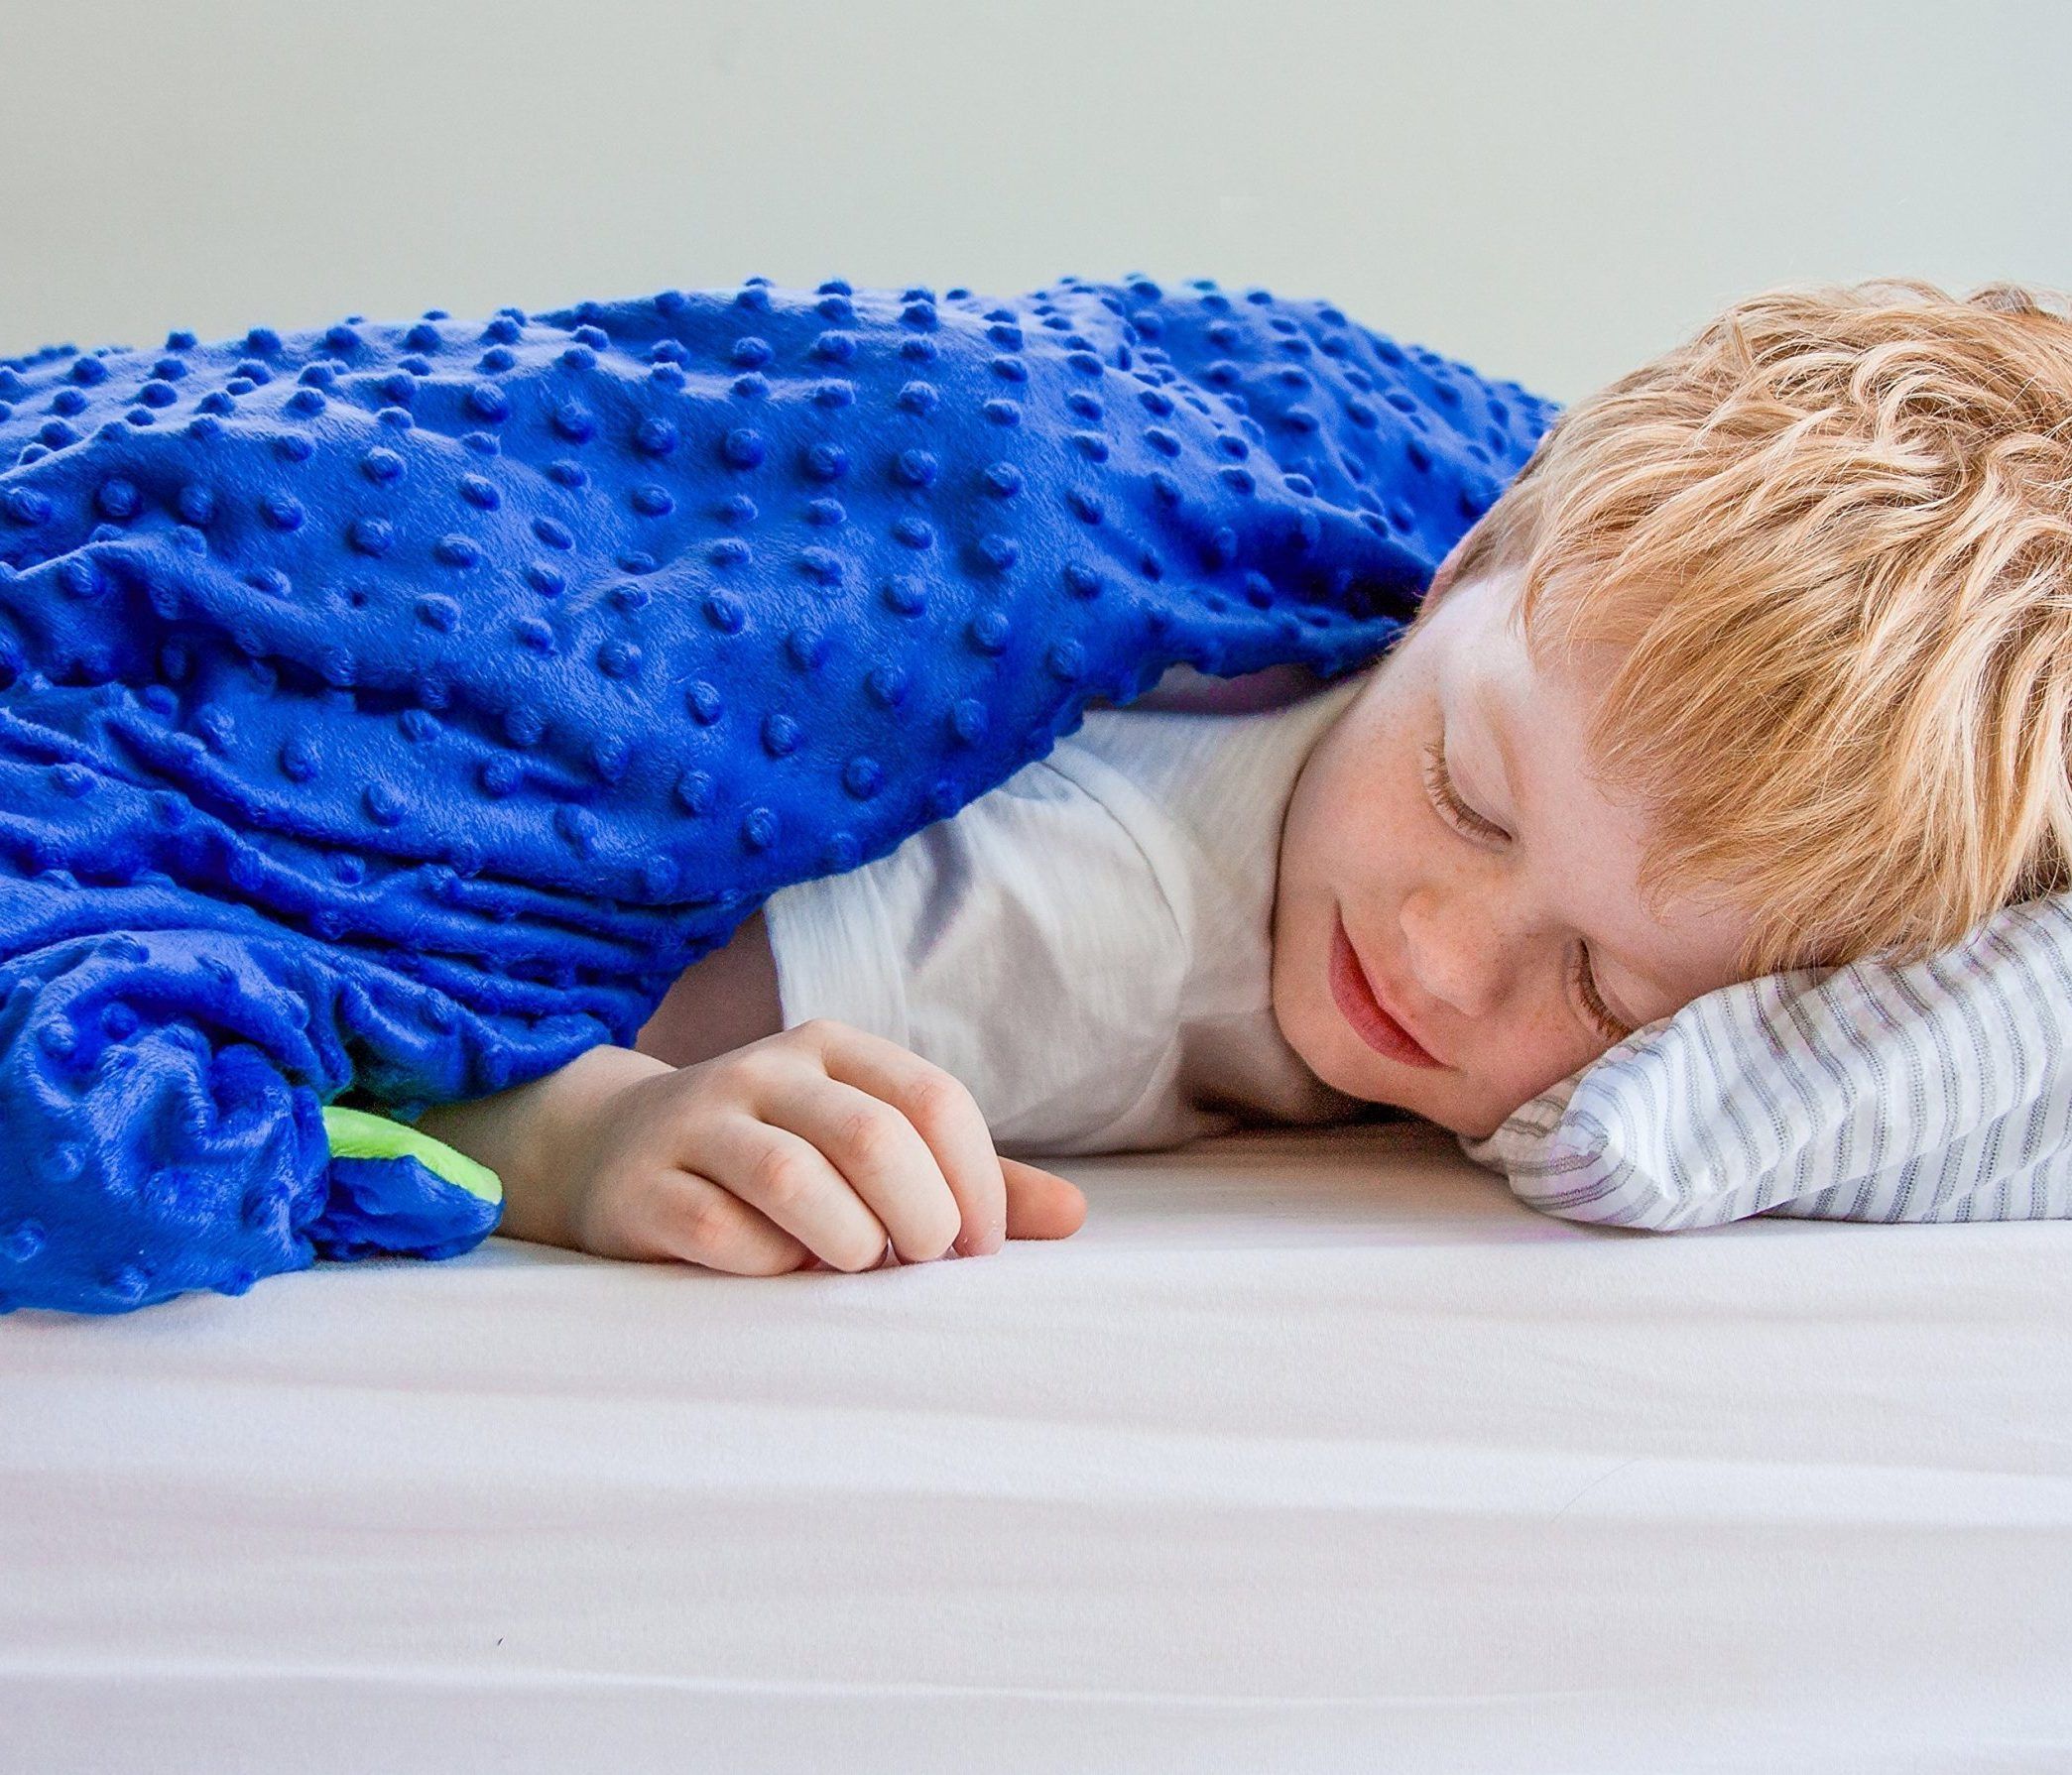 Do you have autism? We have a tip. Learn how a weighted blanket can